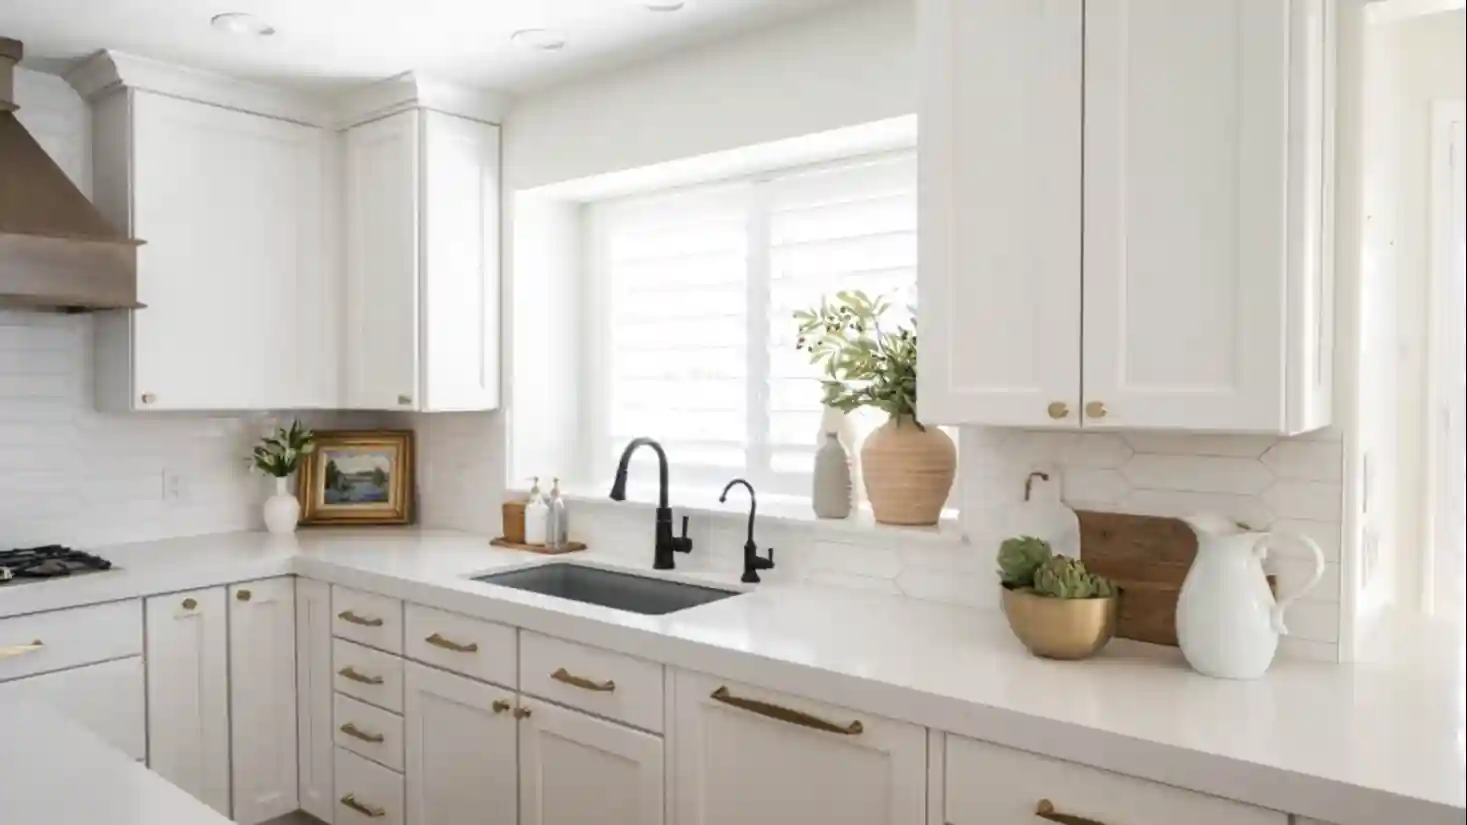 An all white kitchen with brass handles on the cabinetry and the layout thought out strategically for maximum funtionality.